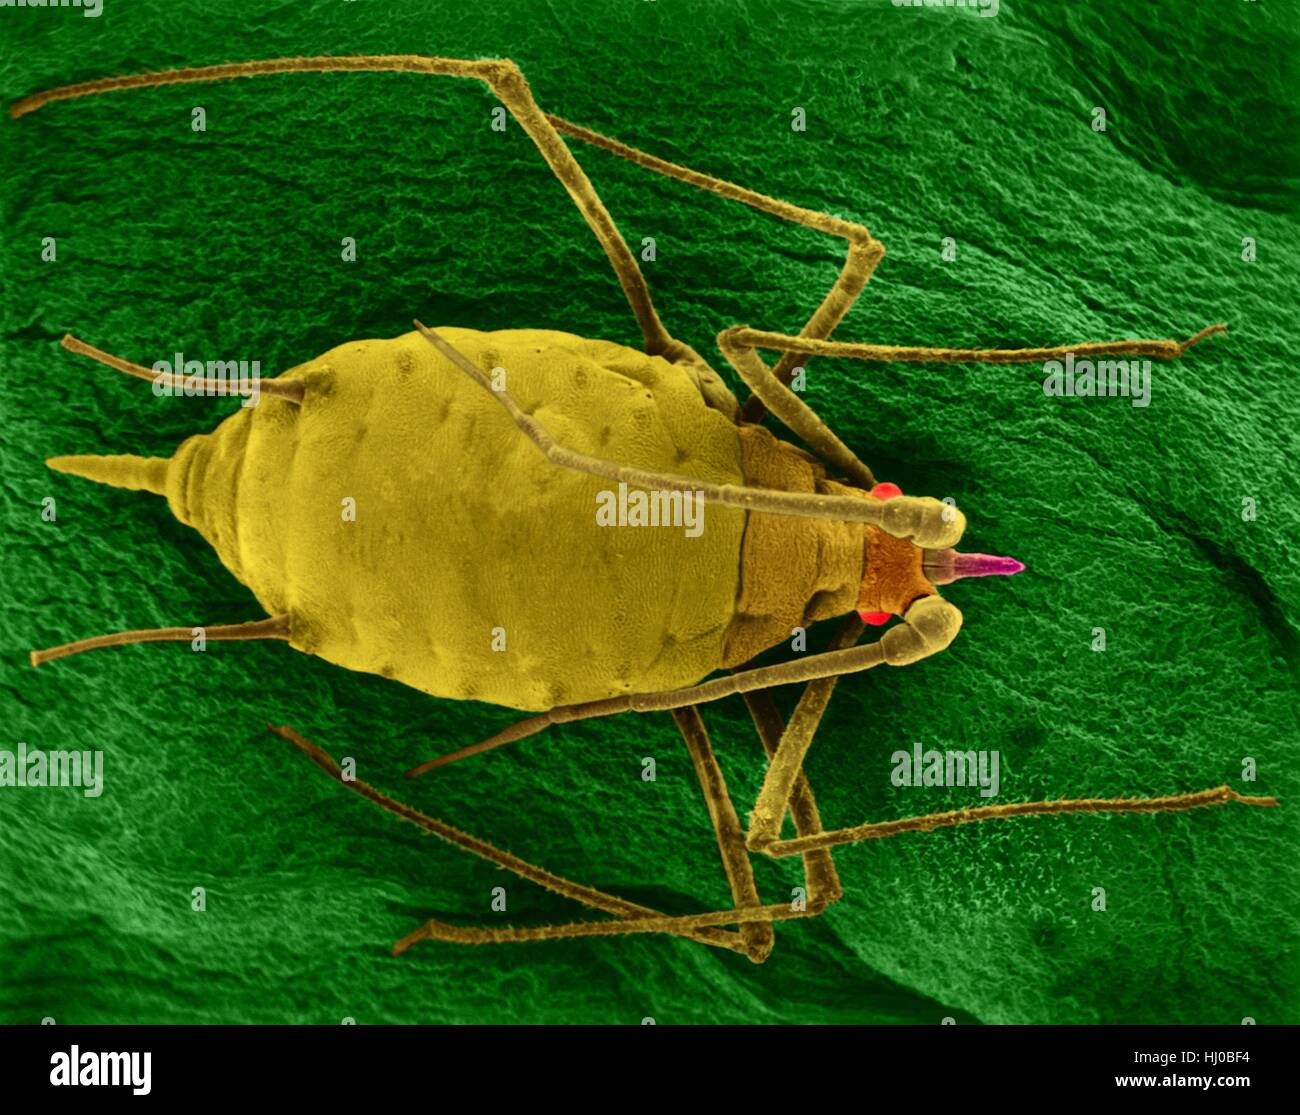 Coloured scanning electron micrograph (SEM) of Aphid mummy (Acyrthosiphon pisum) on a bean leaf. The aphid was parasitized by an aphid wasp which laid its egg inside the live aphid. The newly hatched wasp larvae used the aphid body contents for food, eventually killing the aphid. This insect transmits alfalfa mosaic virus (rhabdovirus) and pea enation mosaic (isometric) virus. Magnification: x5 when shortest axis printed at 25 millimetres. Stock Photo